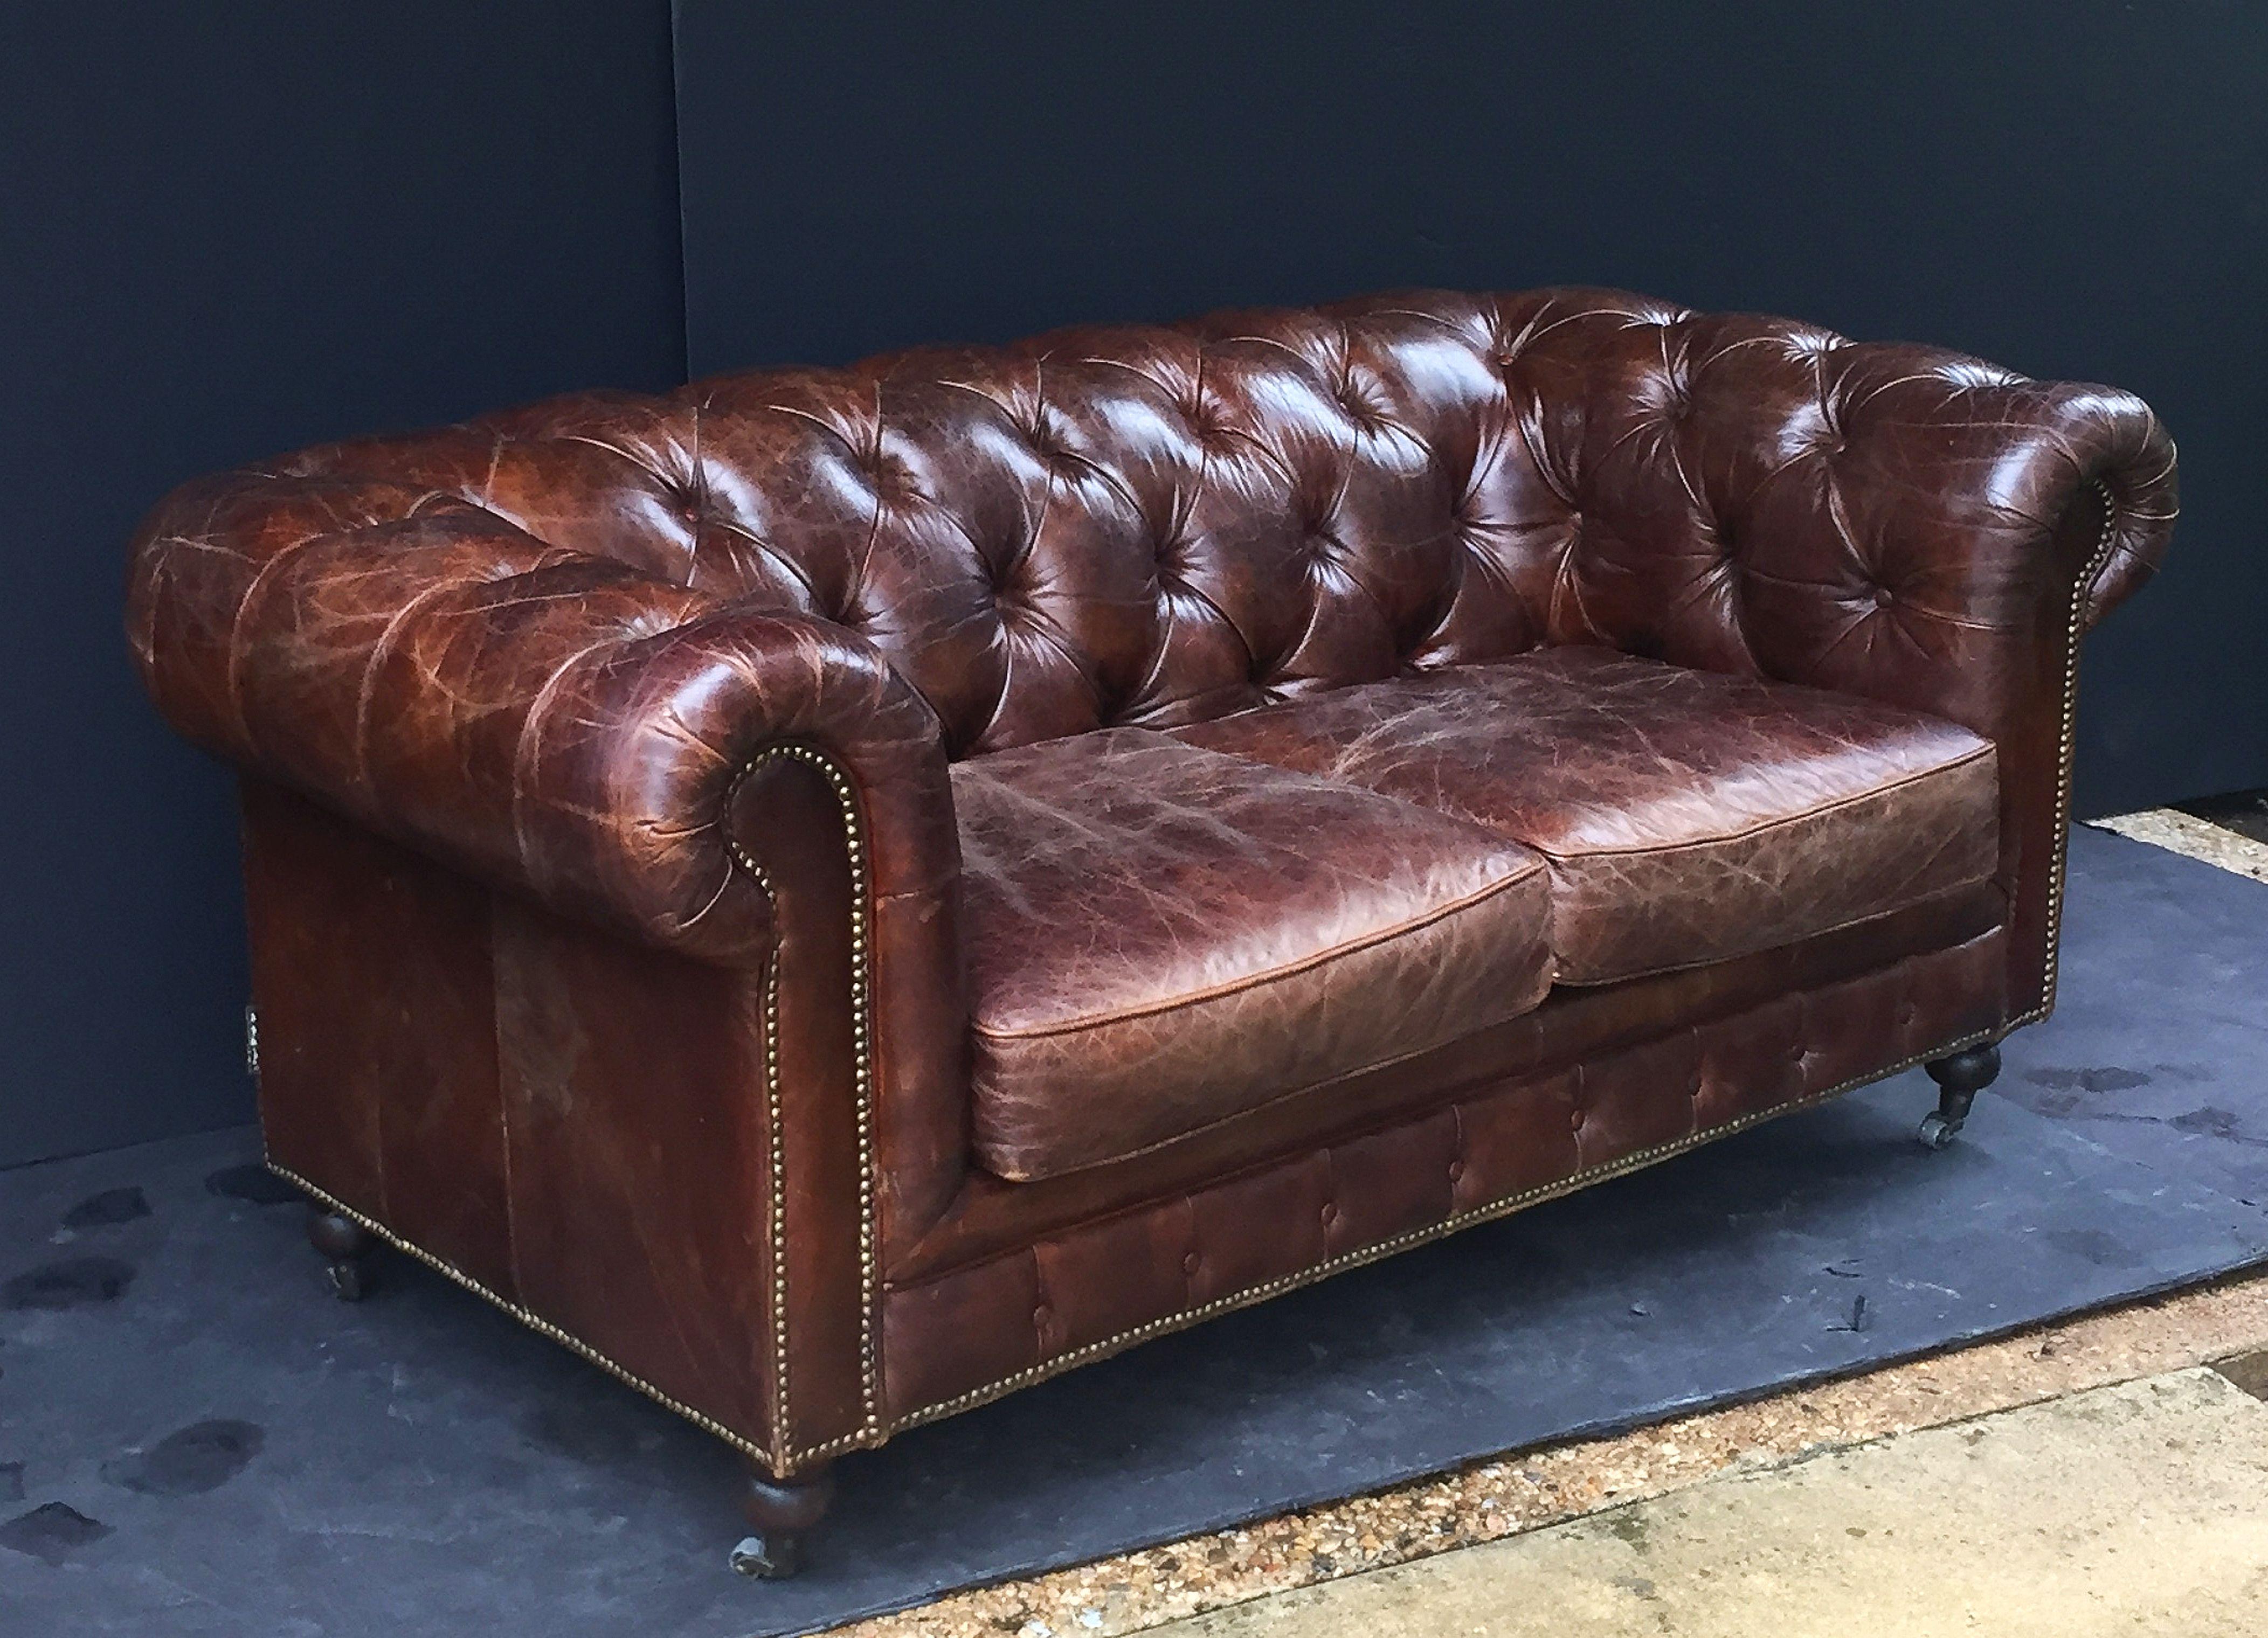 A fine, comfortable English Chesterfield sofa in vintage brown or tobacco leather featuring button-tufted back and arms, two soft leather fitted seat cushions, and beaded-nail trim design, resting on turned feet with casters.

The Chesterfield